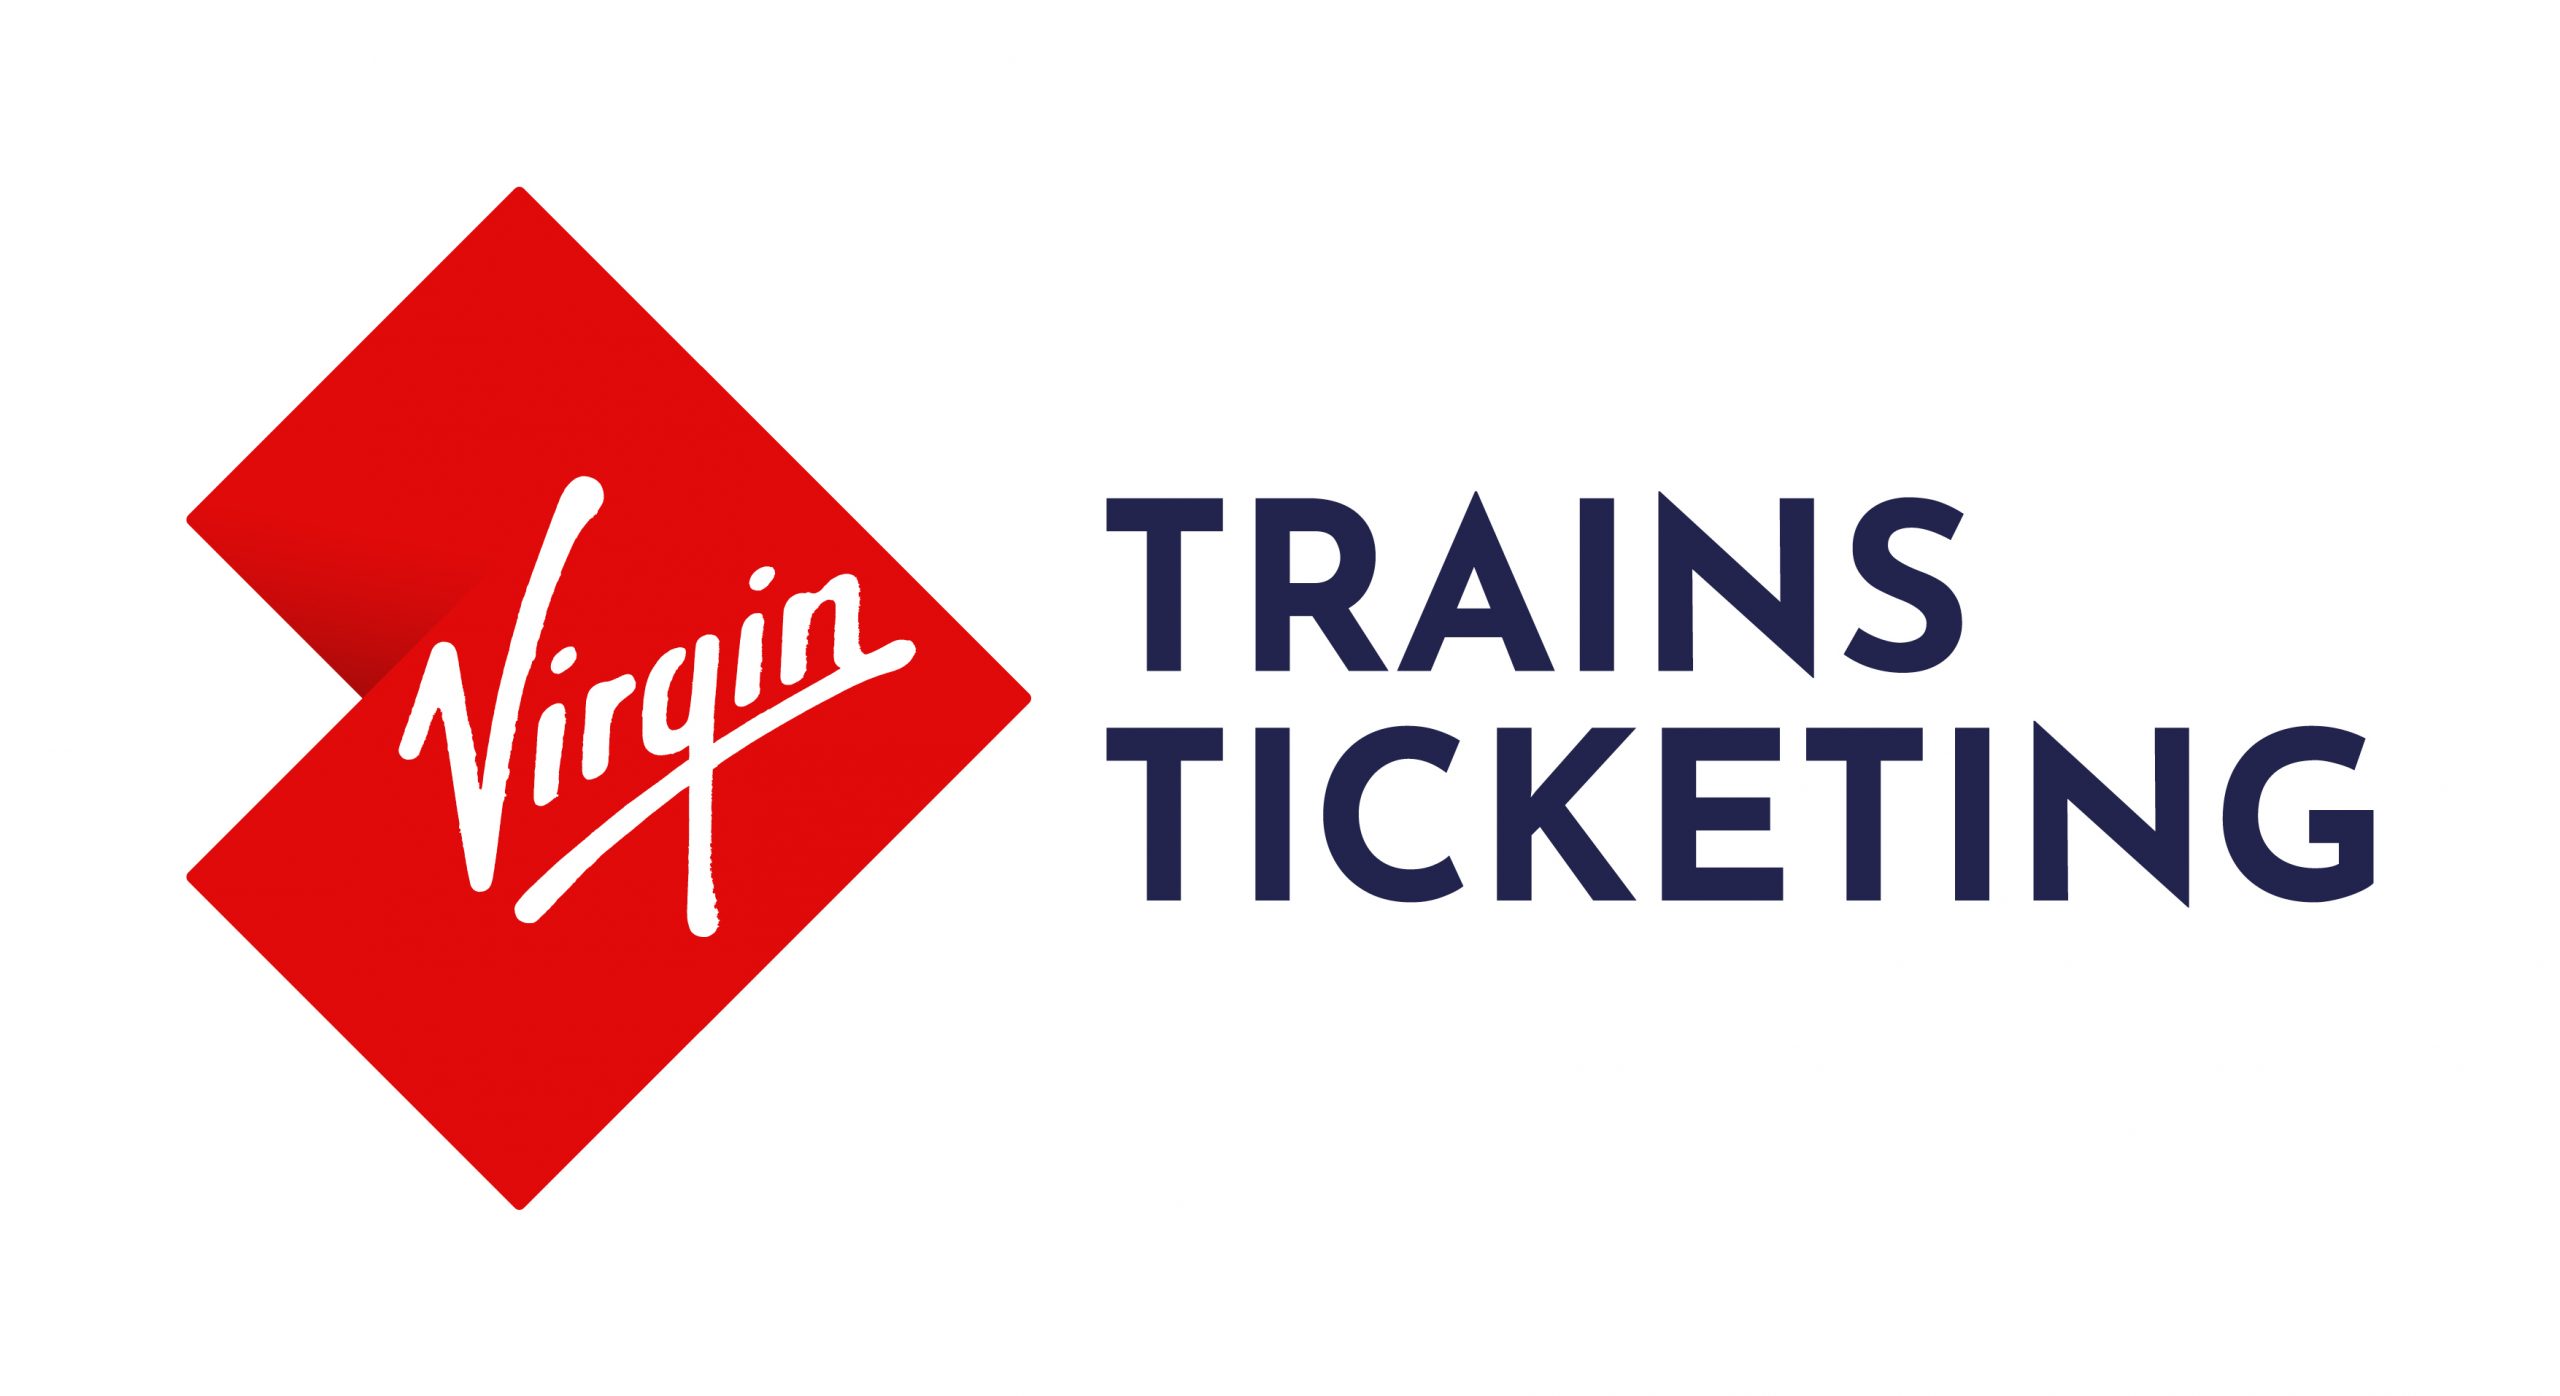 Image: Virgin Trains Ticketing Shortlisted for App of the Year